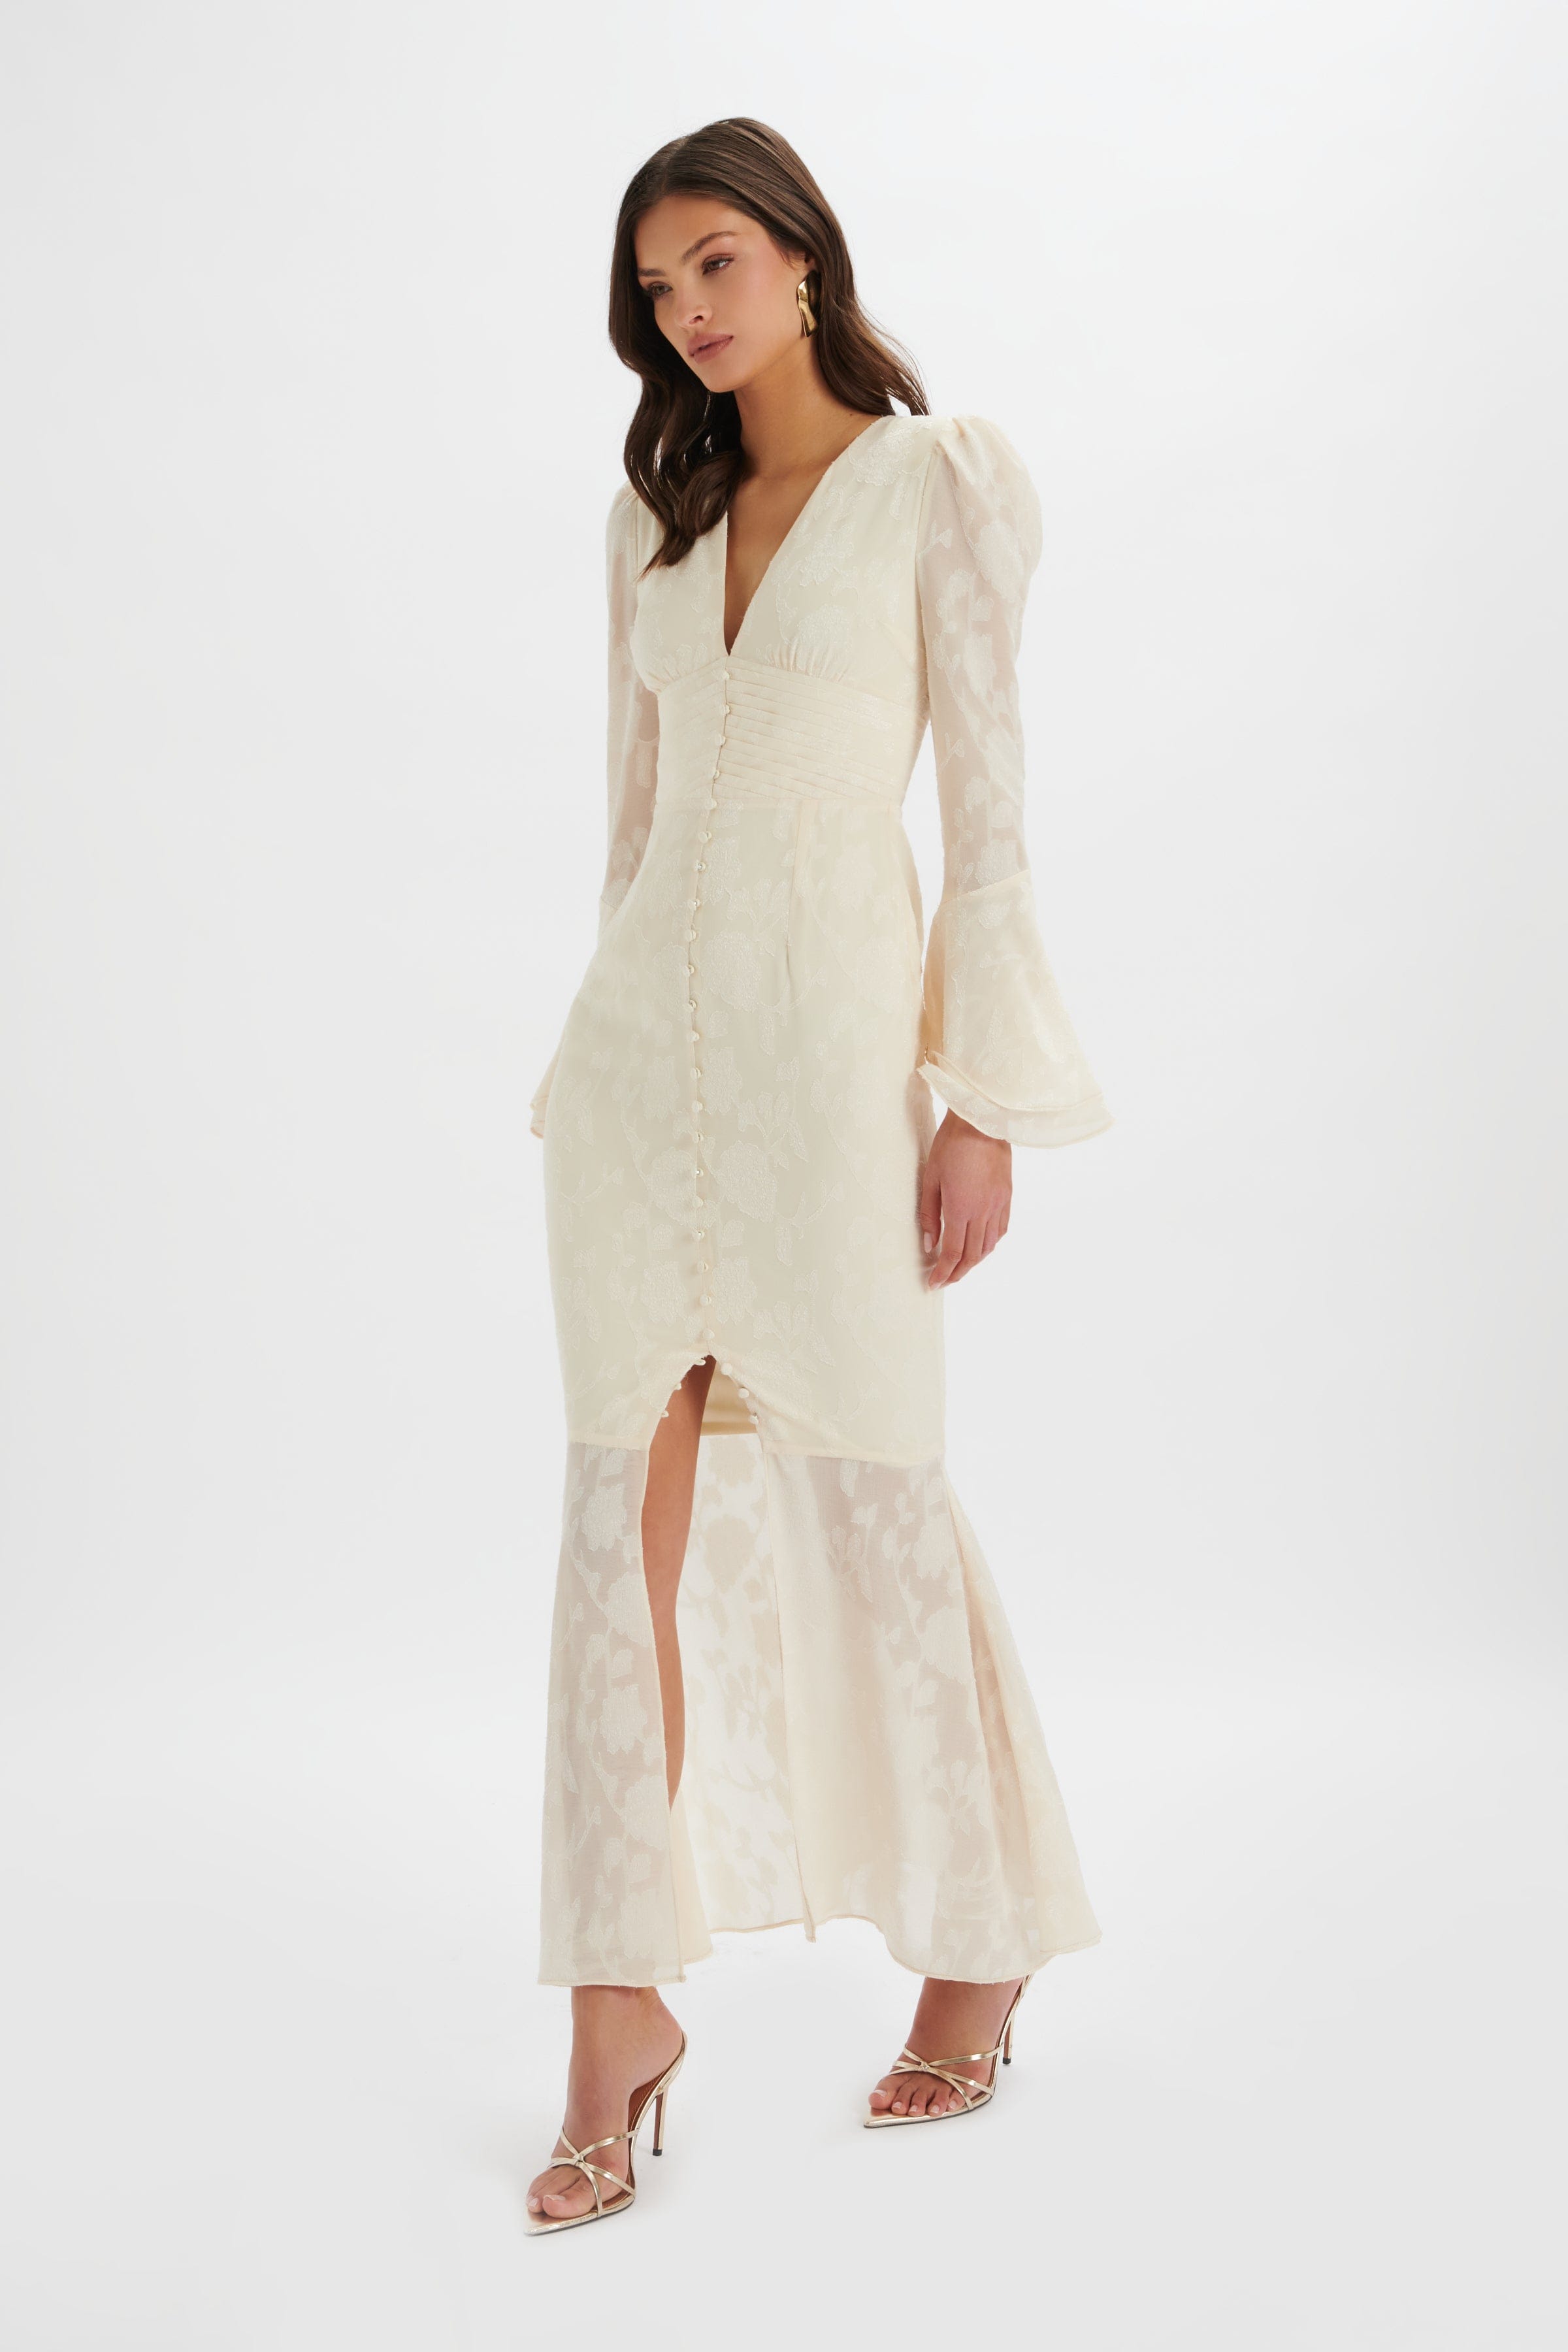 **PRE-ORDER** LAUREN Fluted Sleeve Maxi Dress In Cream Floral Textured Chiffon